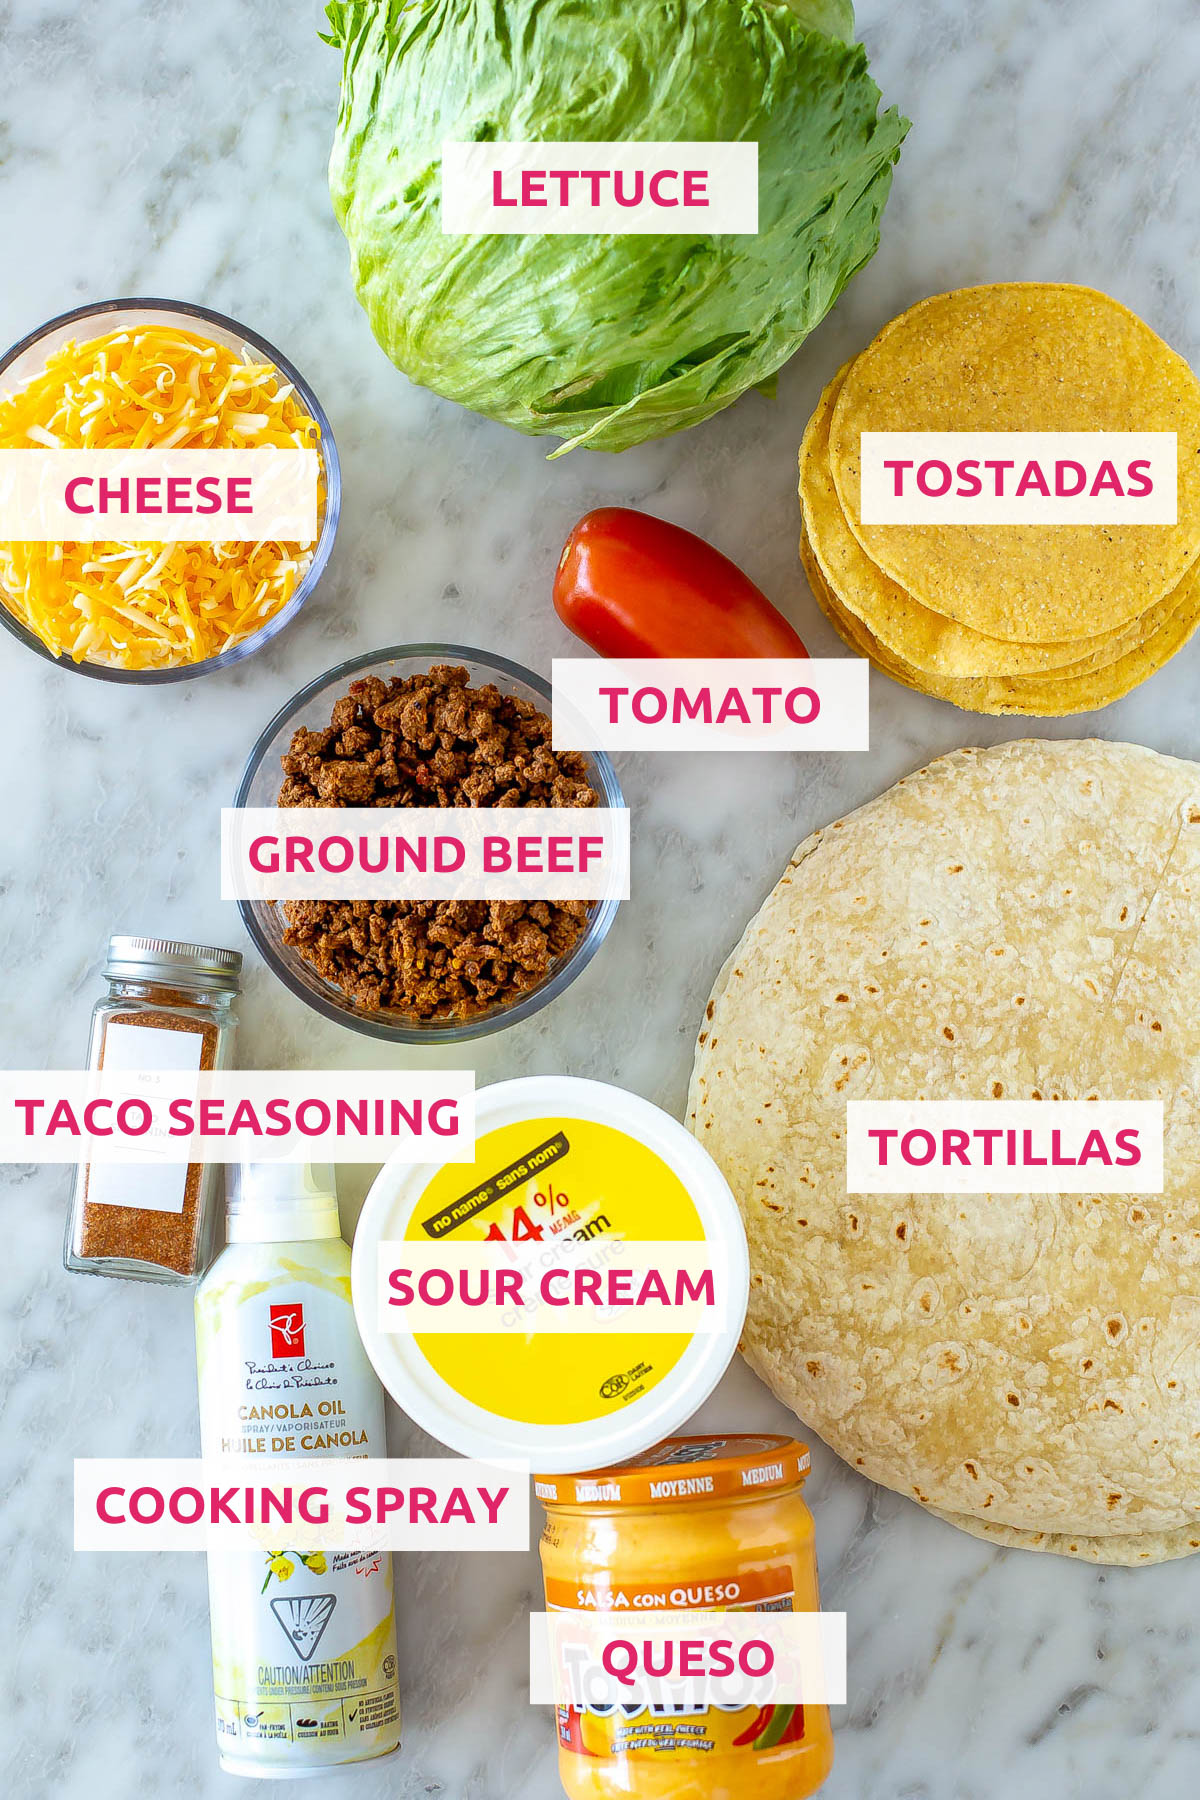 Ingredients for copycat crunchwrap supreme: lettuce, tostadas, tortillas, queso, cooking spray, sour cream, taco seasoning, ground beef, cheese and tomato.